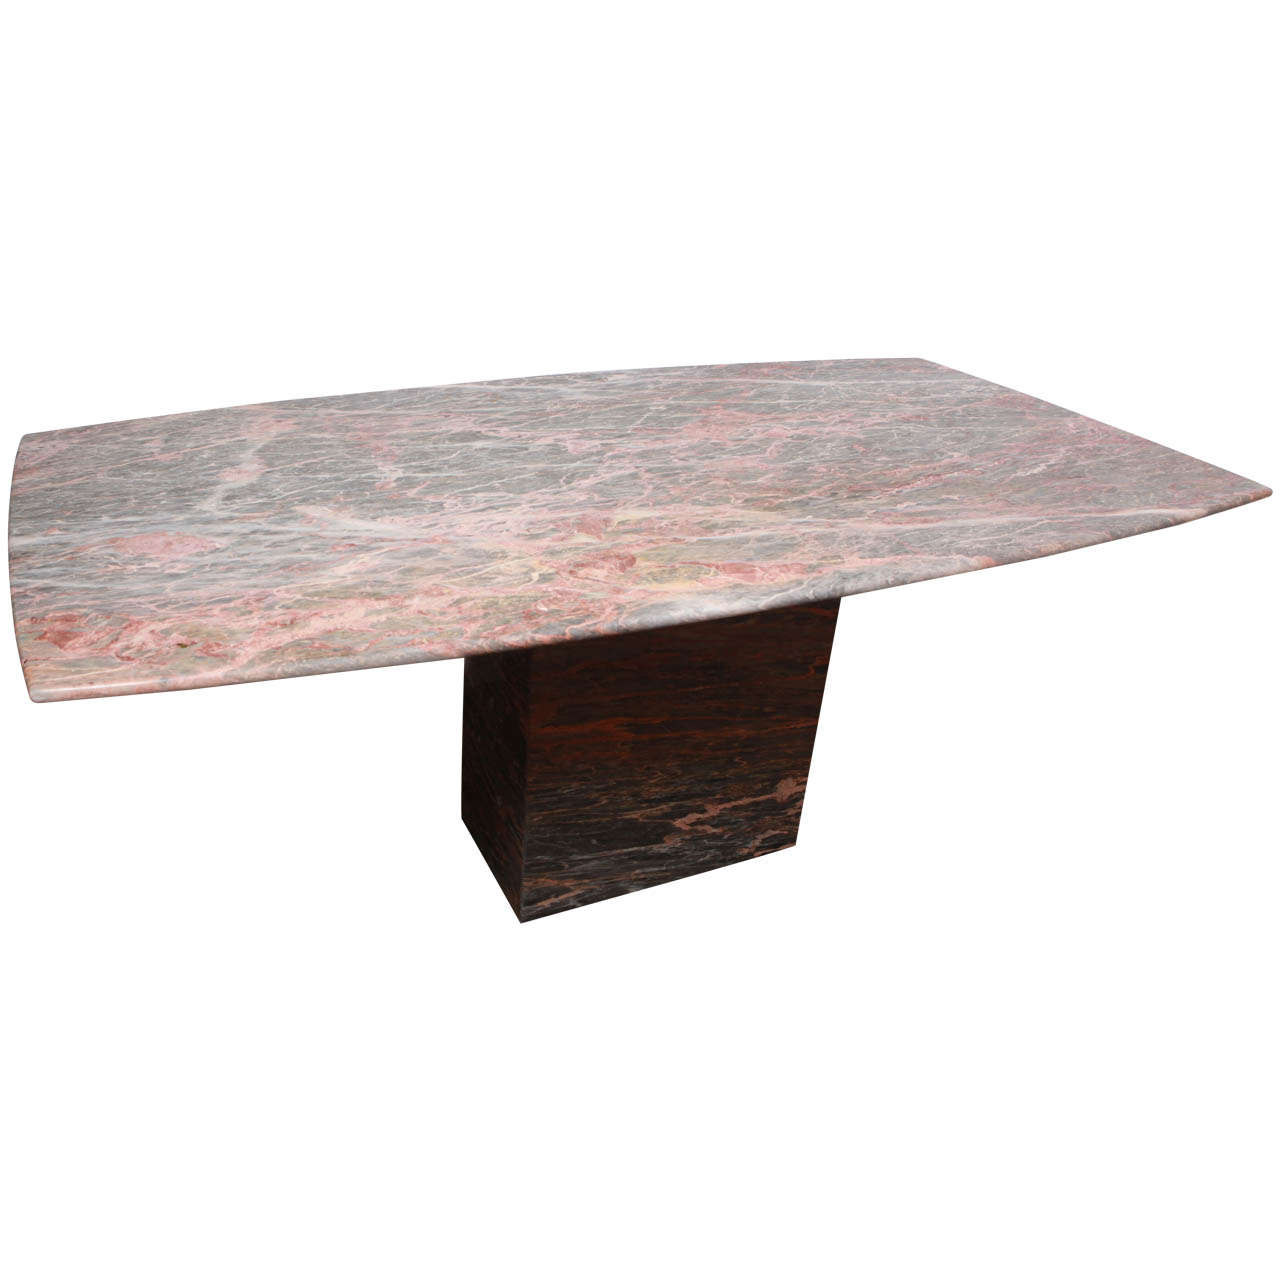 1960's Italian Marble Dining Table For Sale